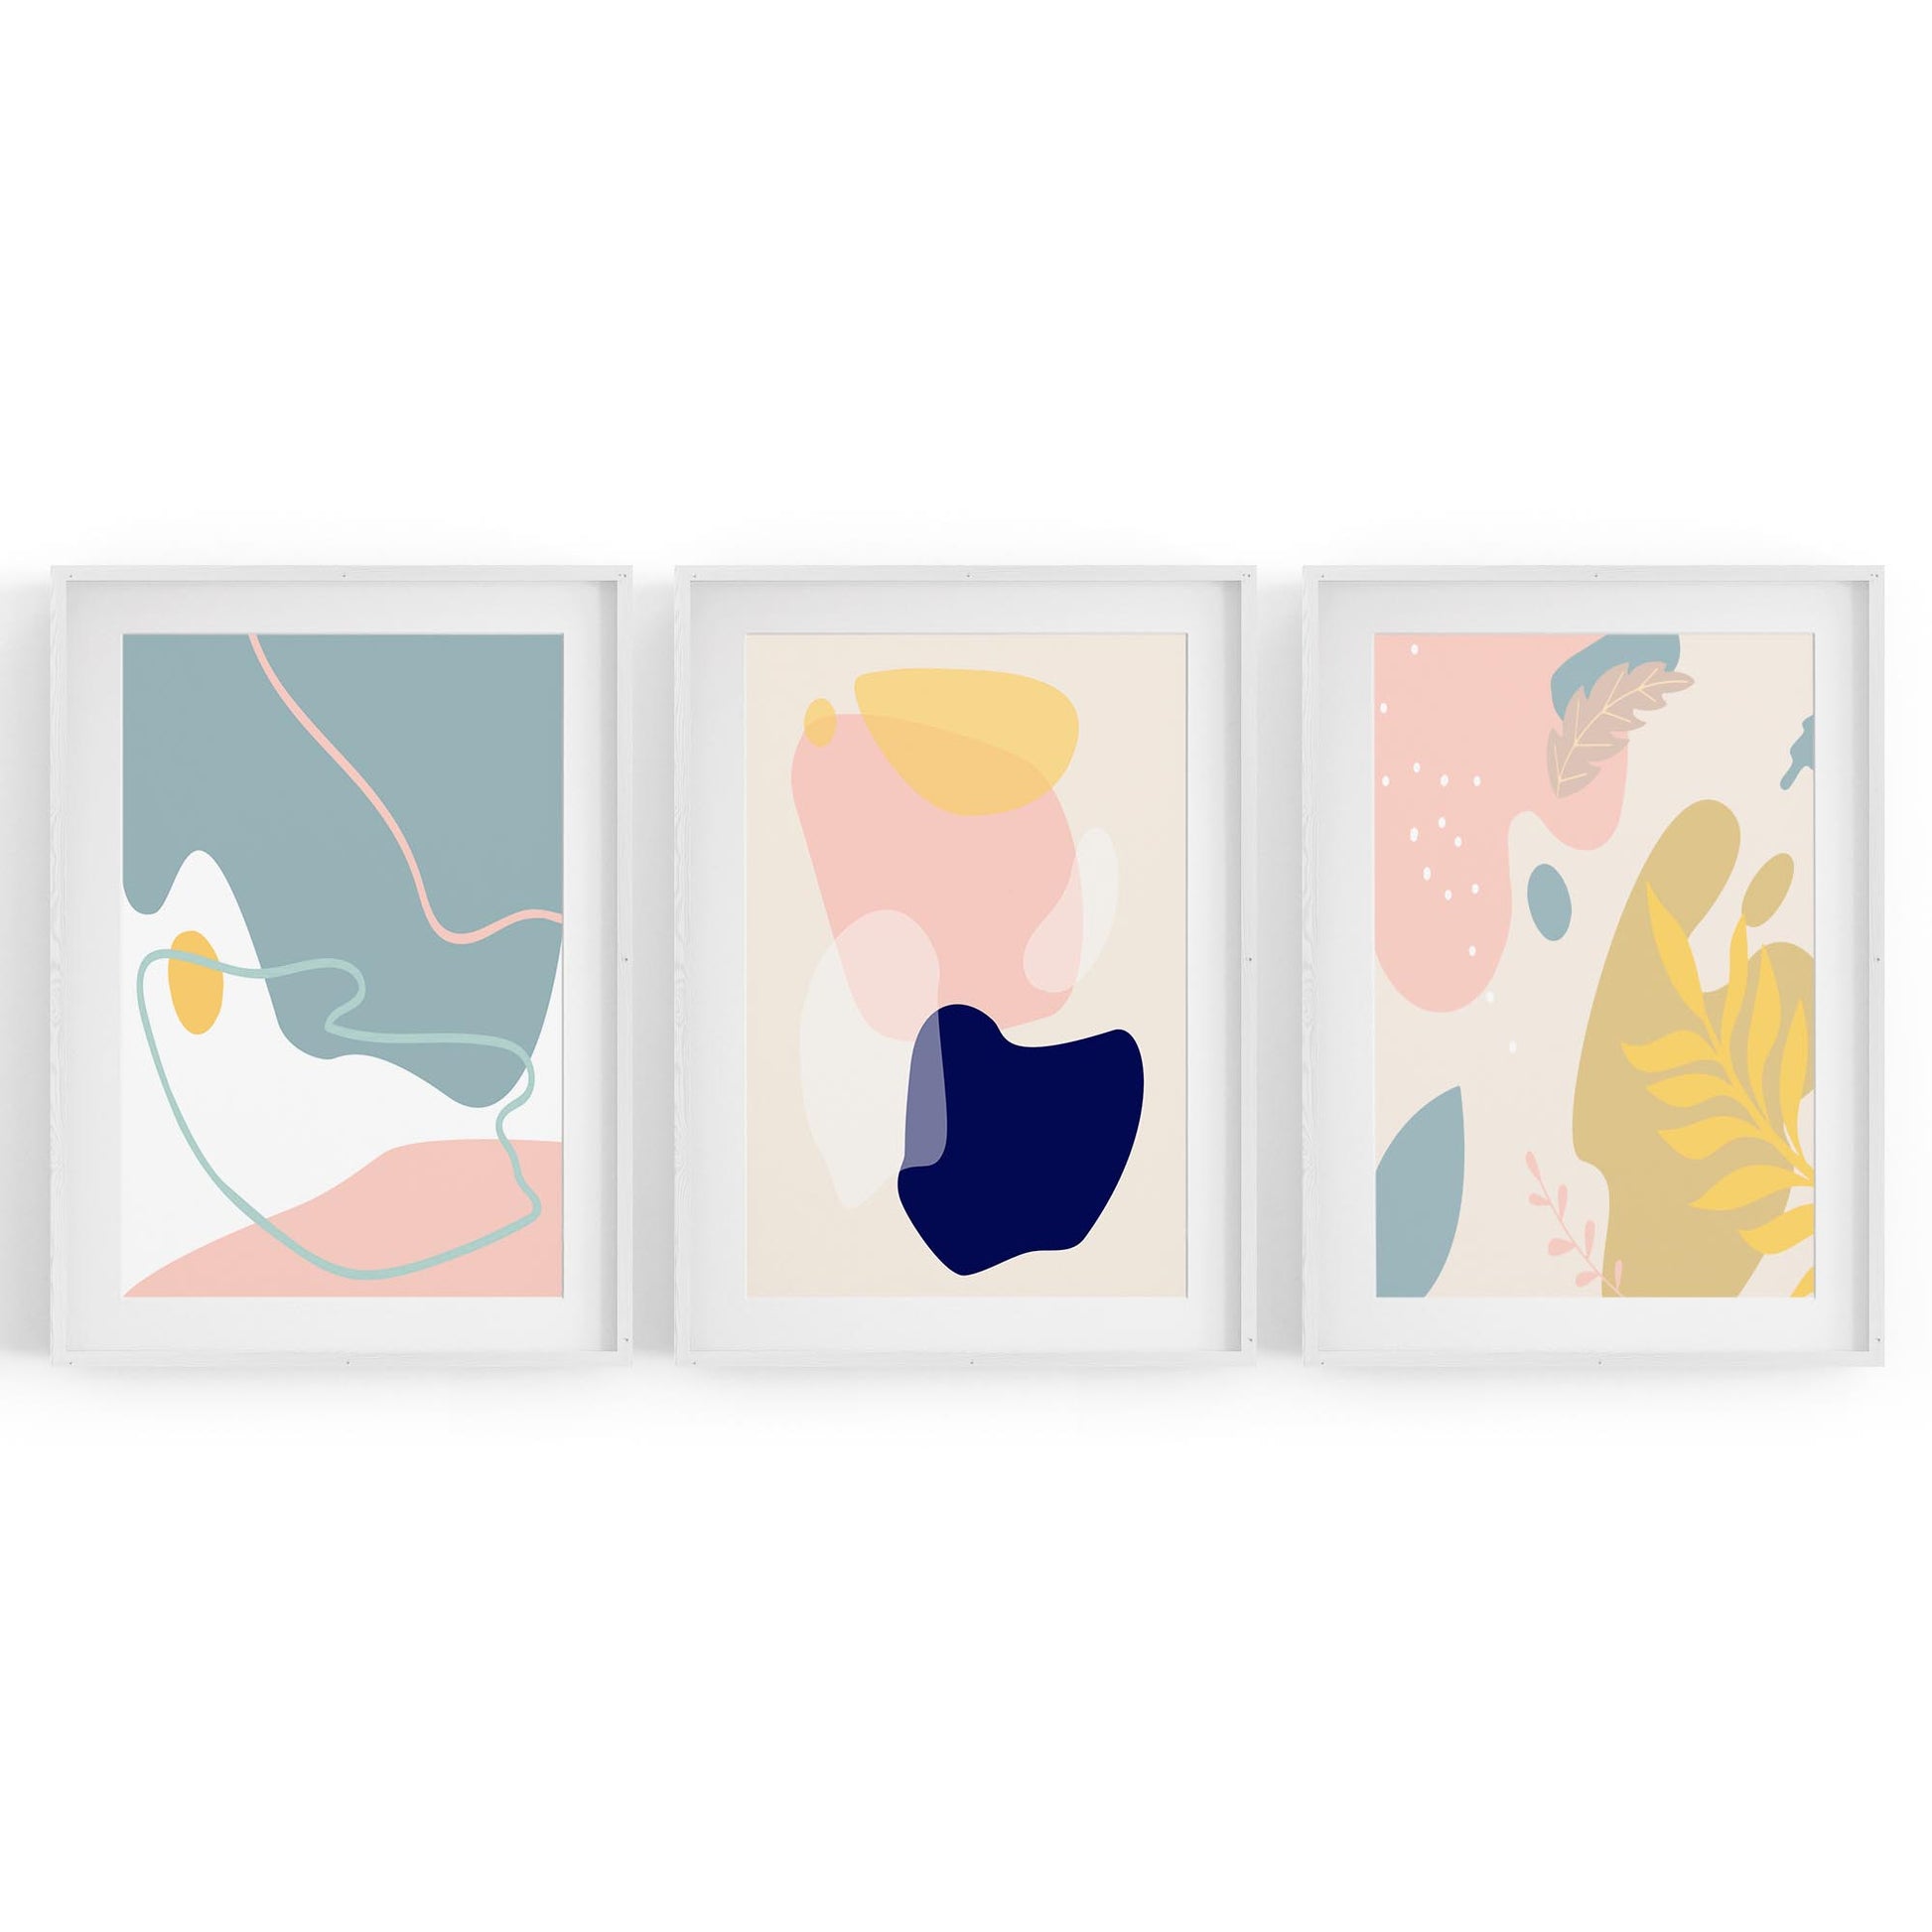 Set of Minimal Calm Abstract Shape Wall Art #1 - The Affordable Art Company